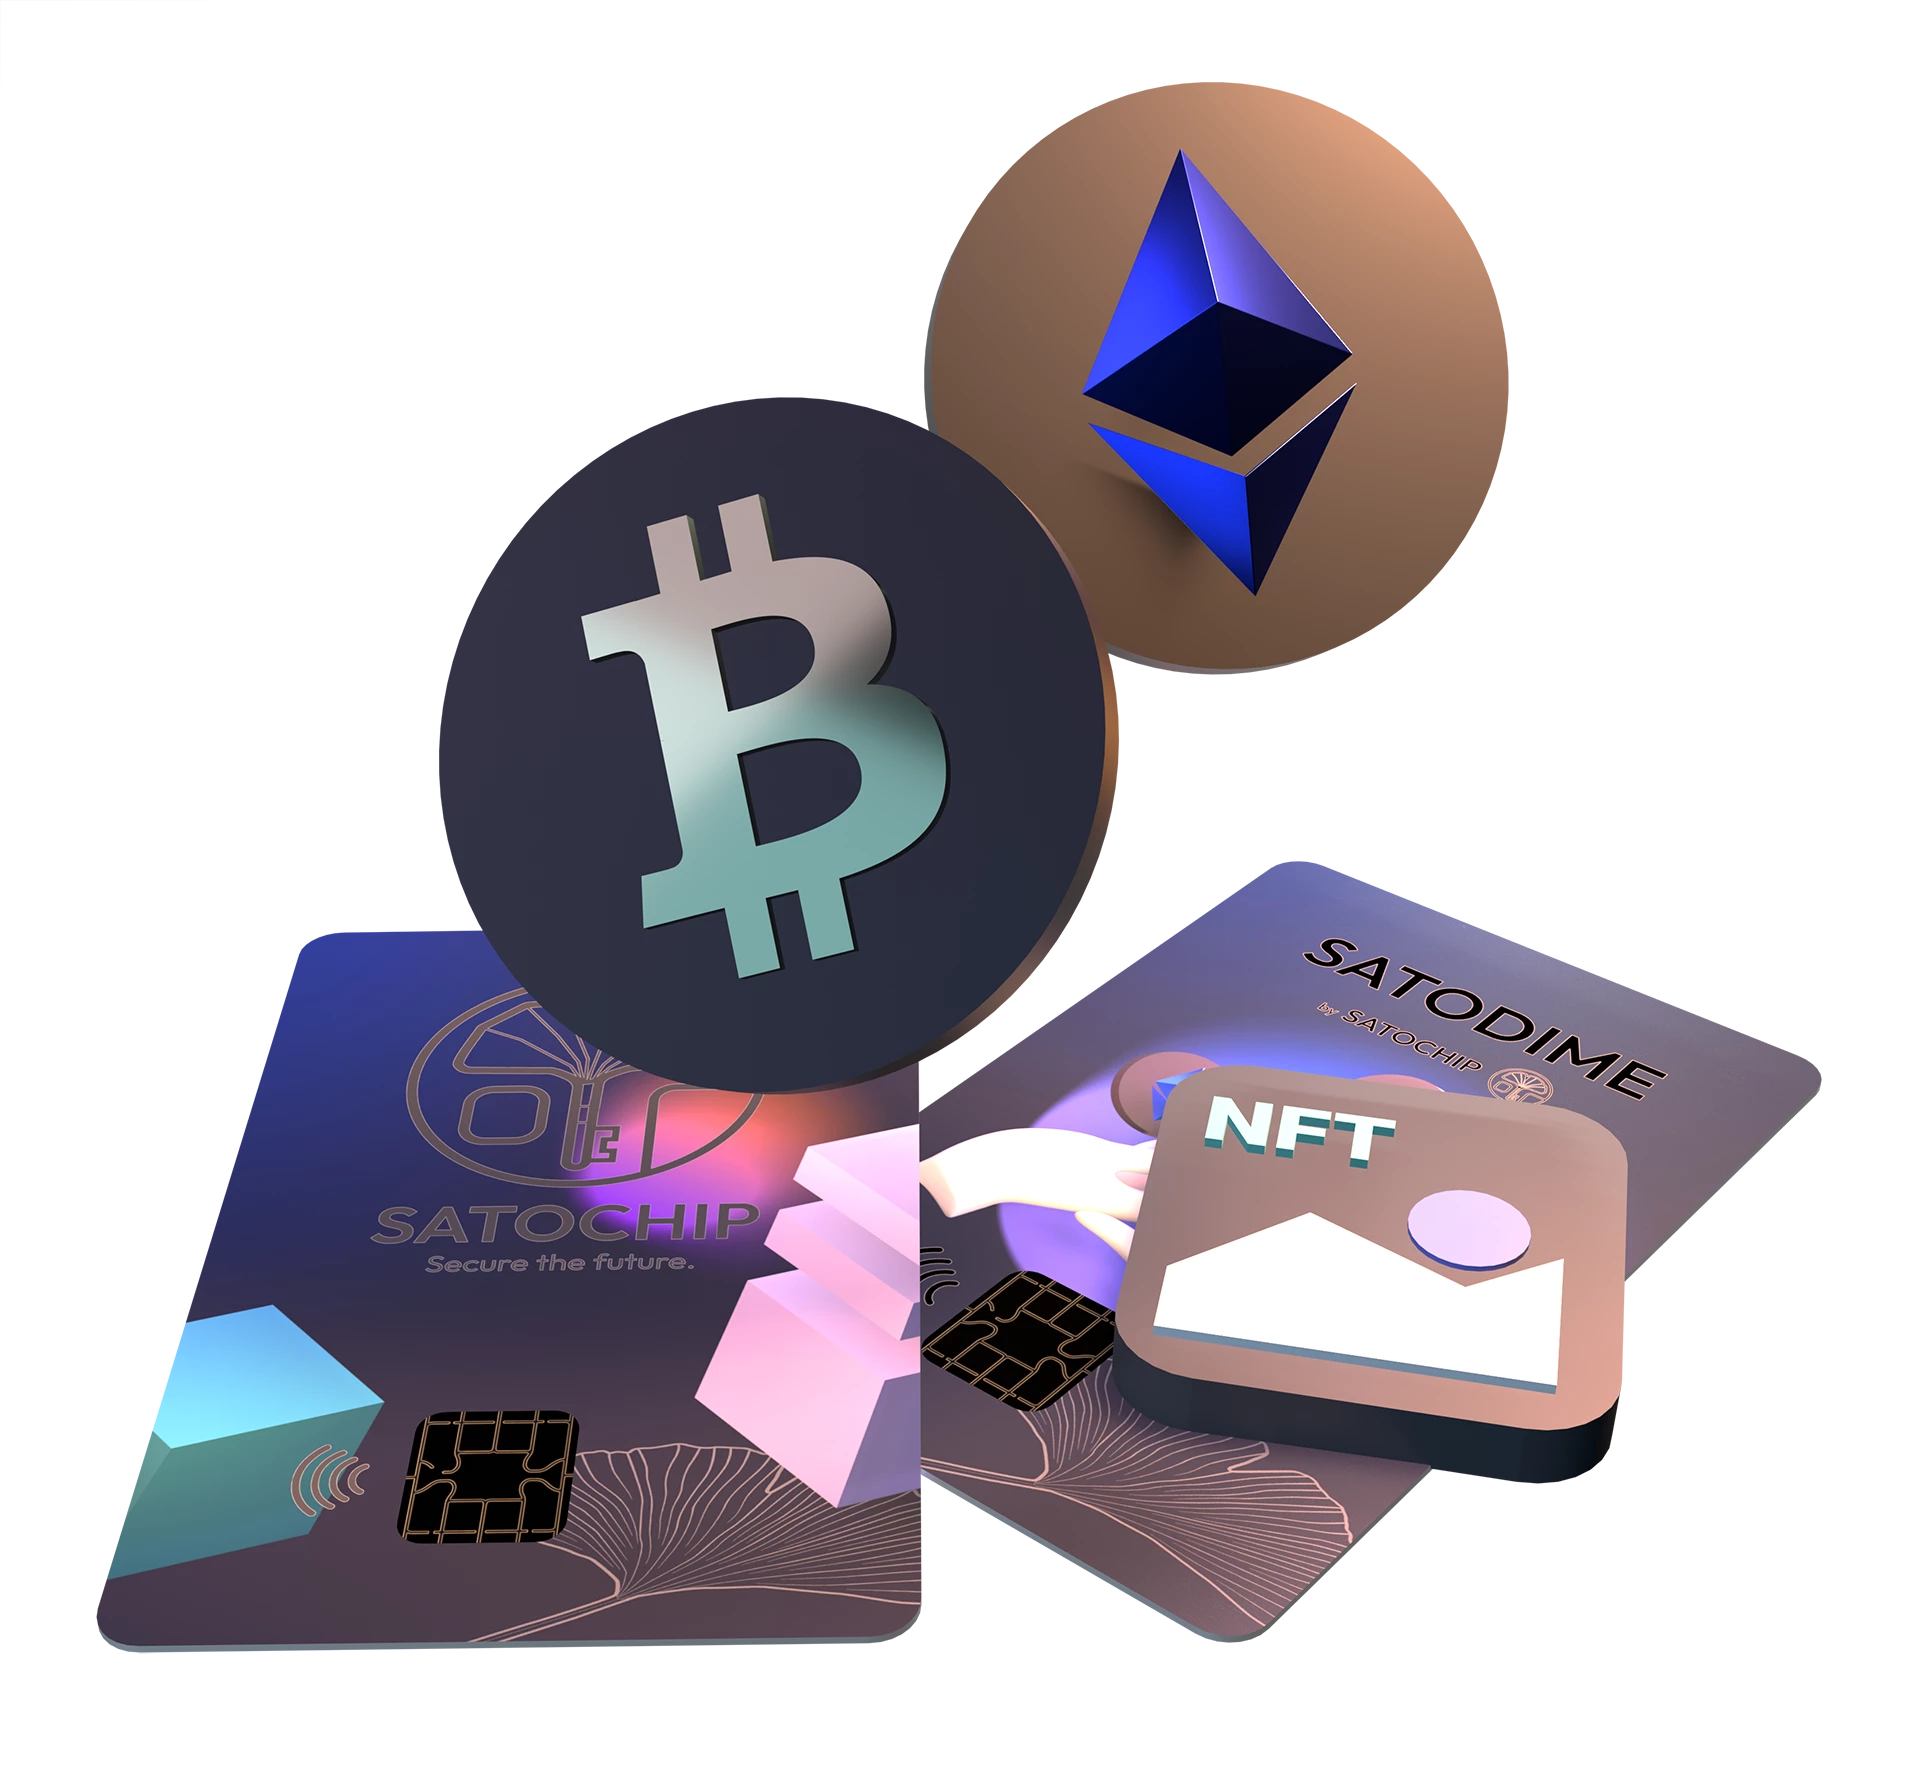 Illustration of the NFC smart card and Bitcoin, Ethereum and NFT tokens.